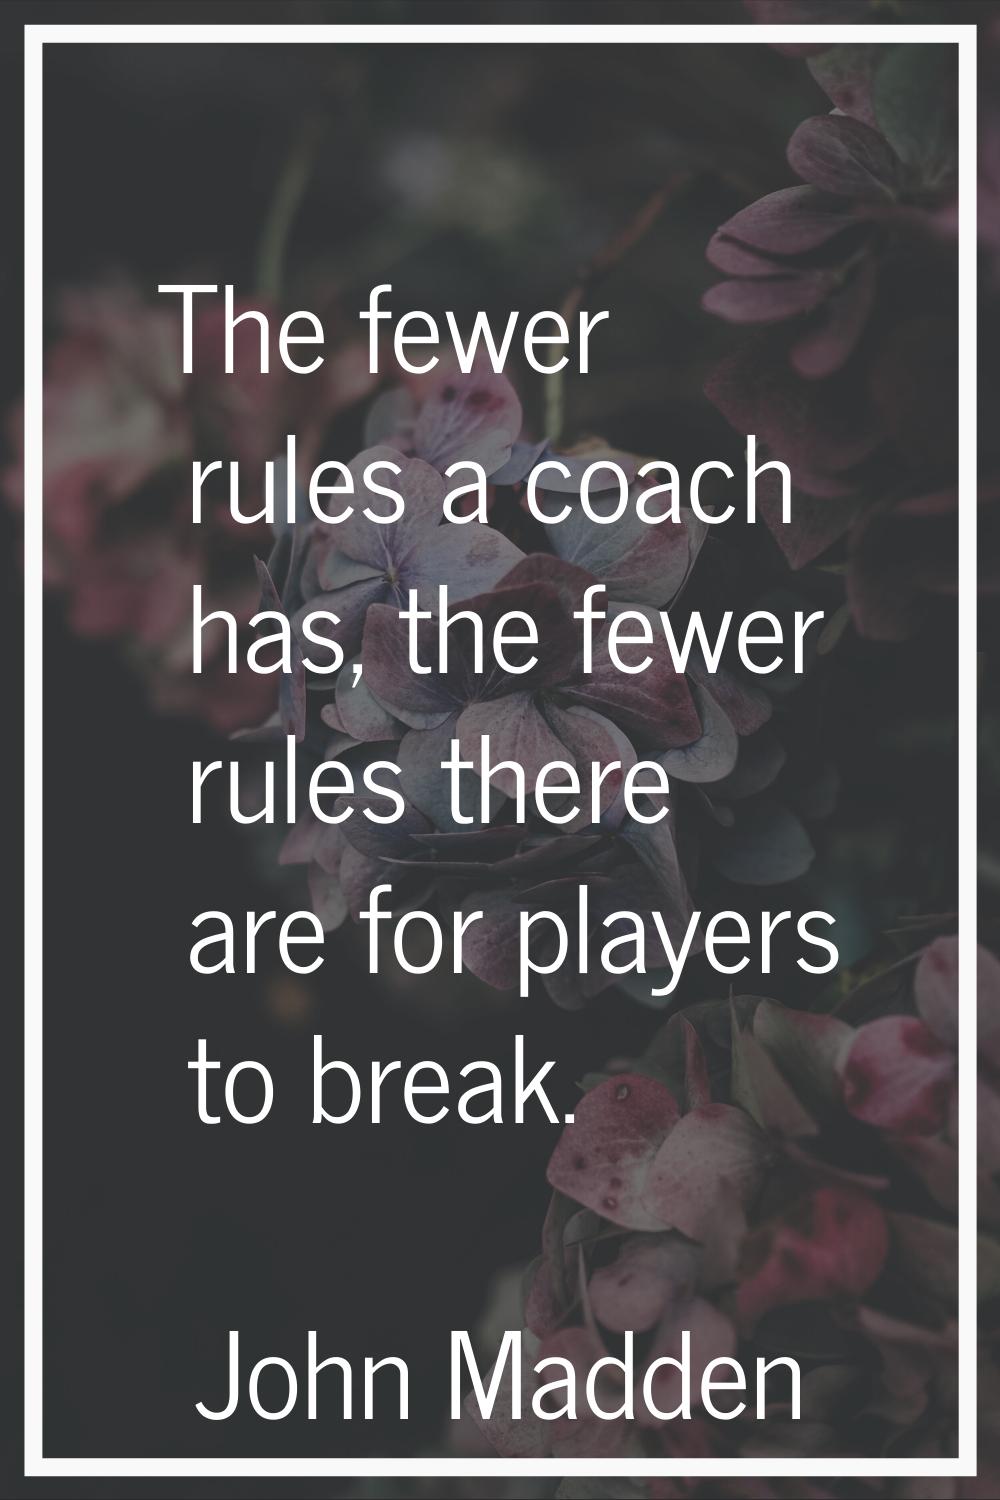 The fewer rules a coach has, the fewer rules there are for players to break.